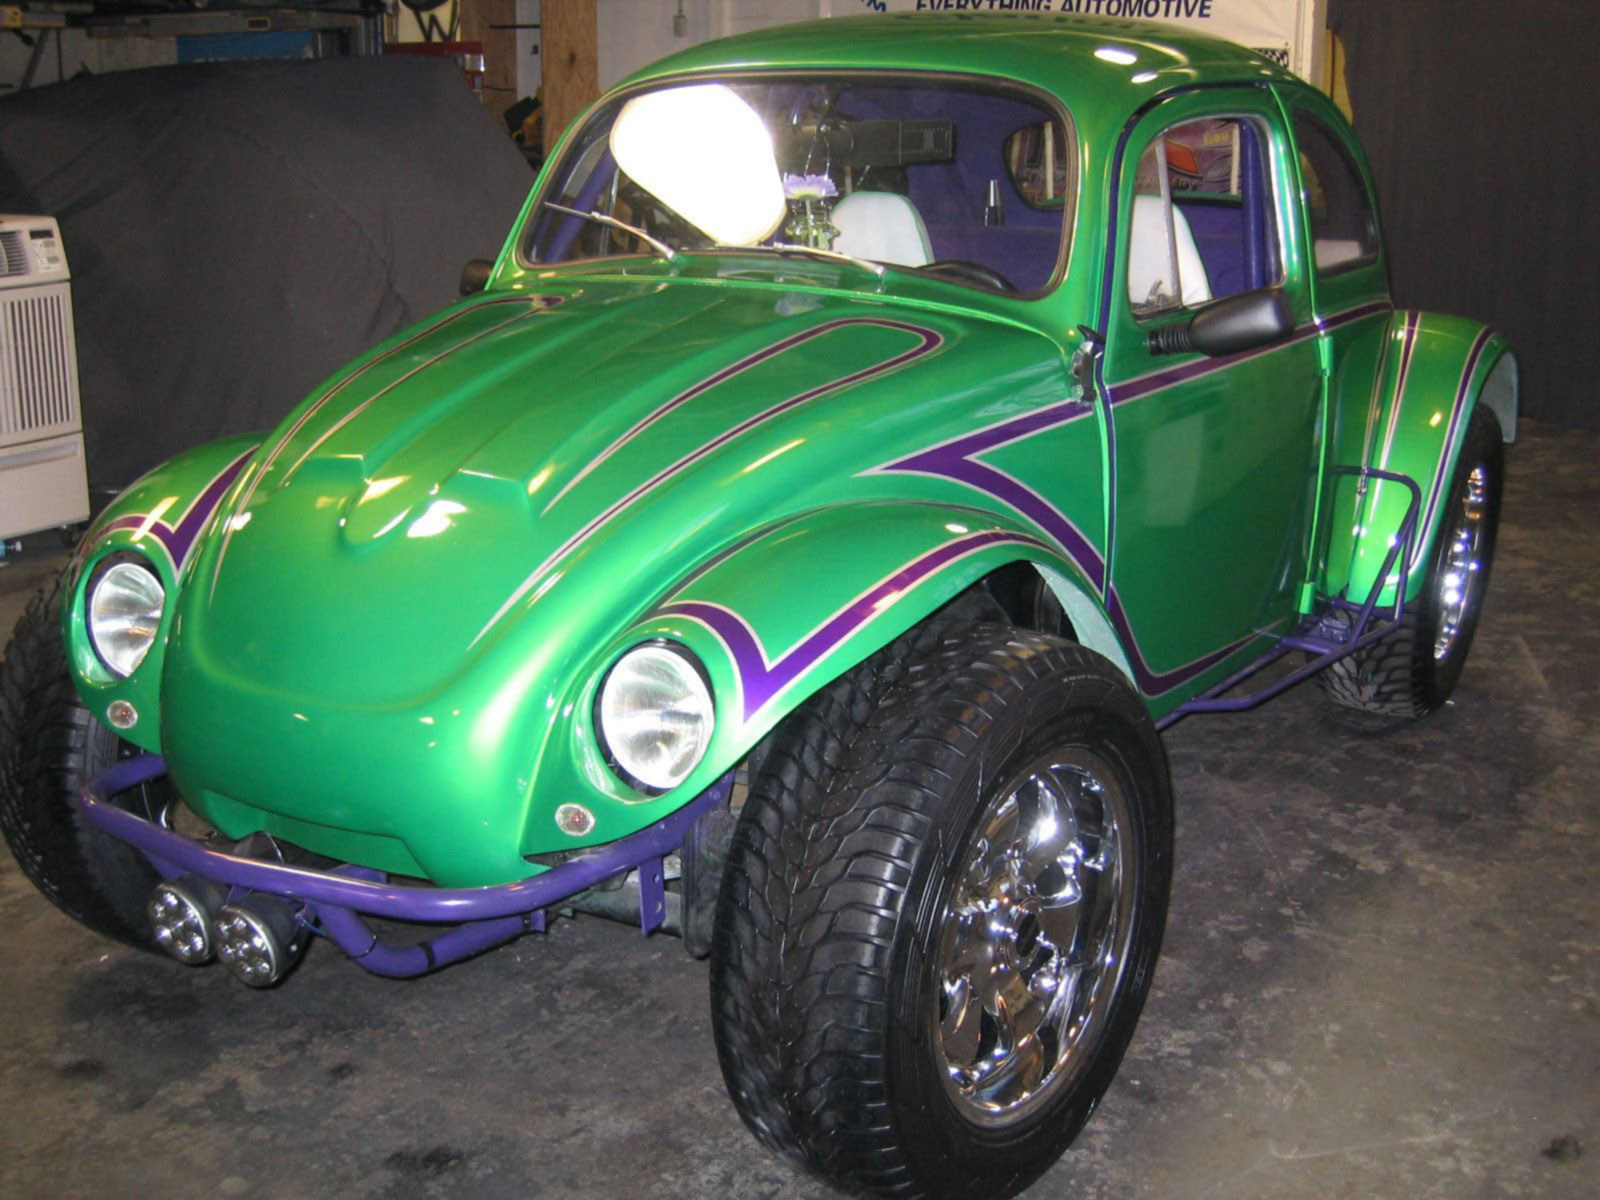 a green volkswagon beetle tricked out for the show